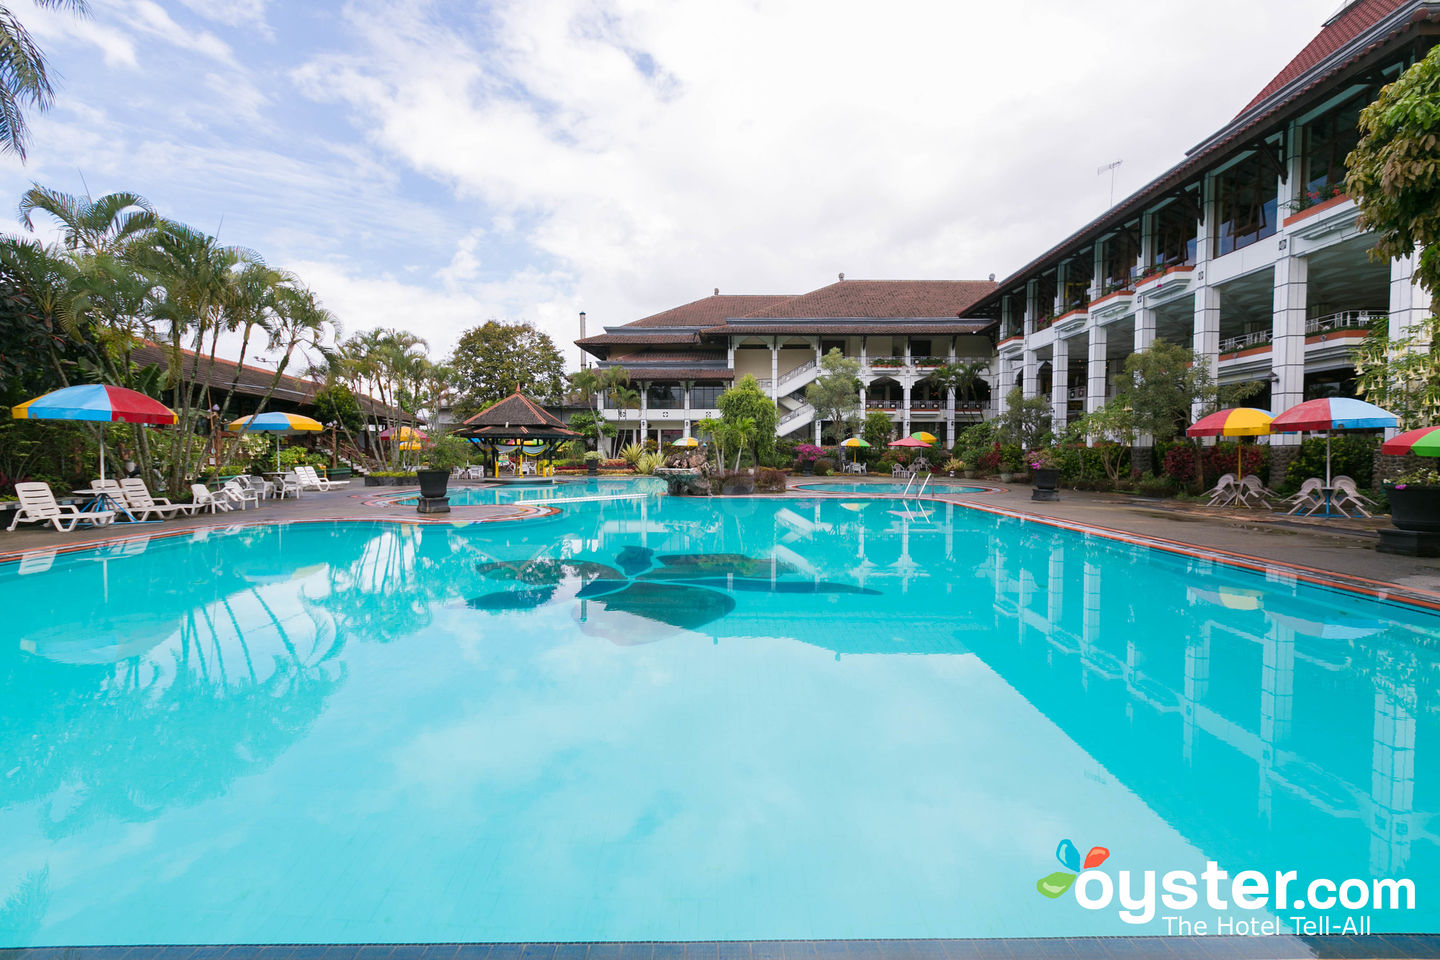 Royal Orchids Garden Hotel Review What To Really Expect If You Stay